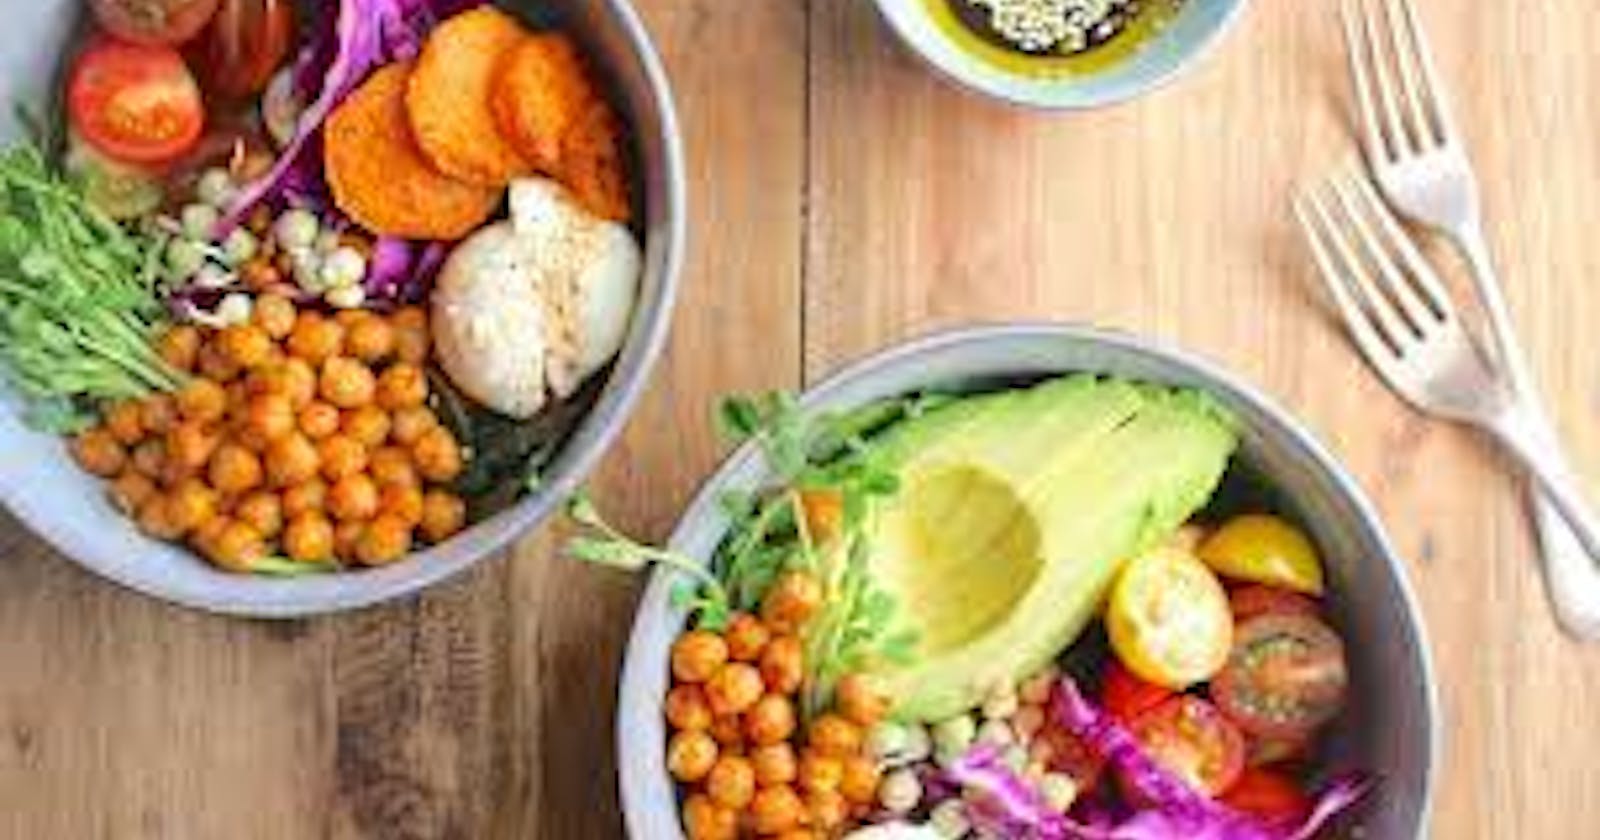 10 Benefits of a Plant-Based Diet for Gut Health